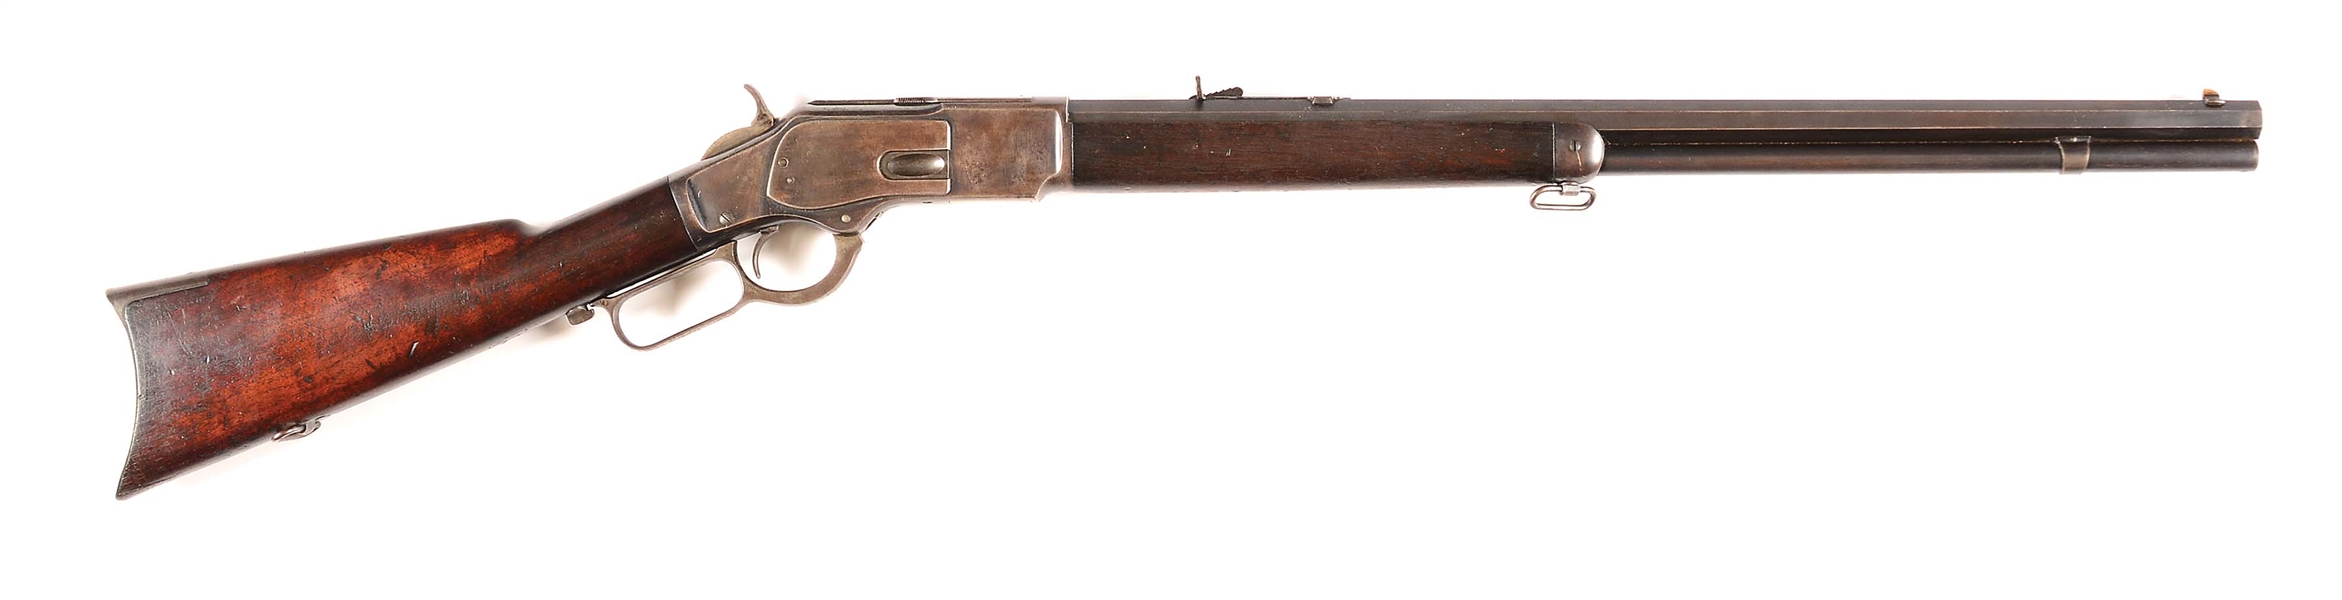 (A) EXTREMELY RARE ATLANTA POLICE WINCHESTER MODEL 1873 LEVER ACTION RIFLE (1890).